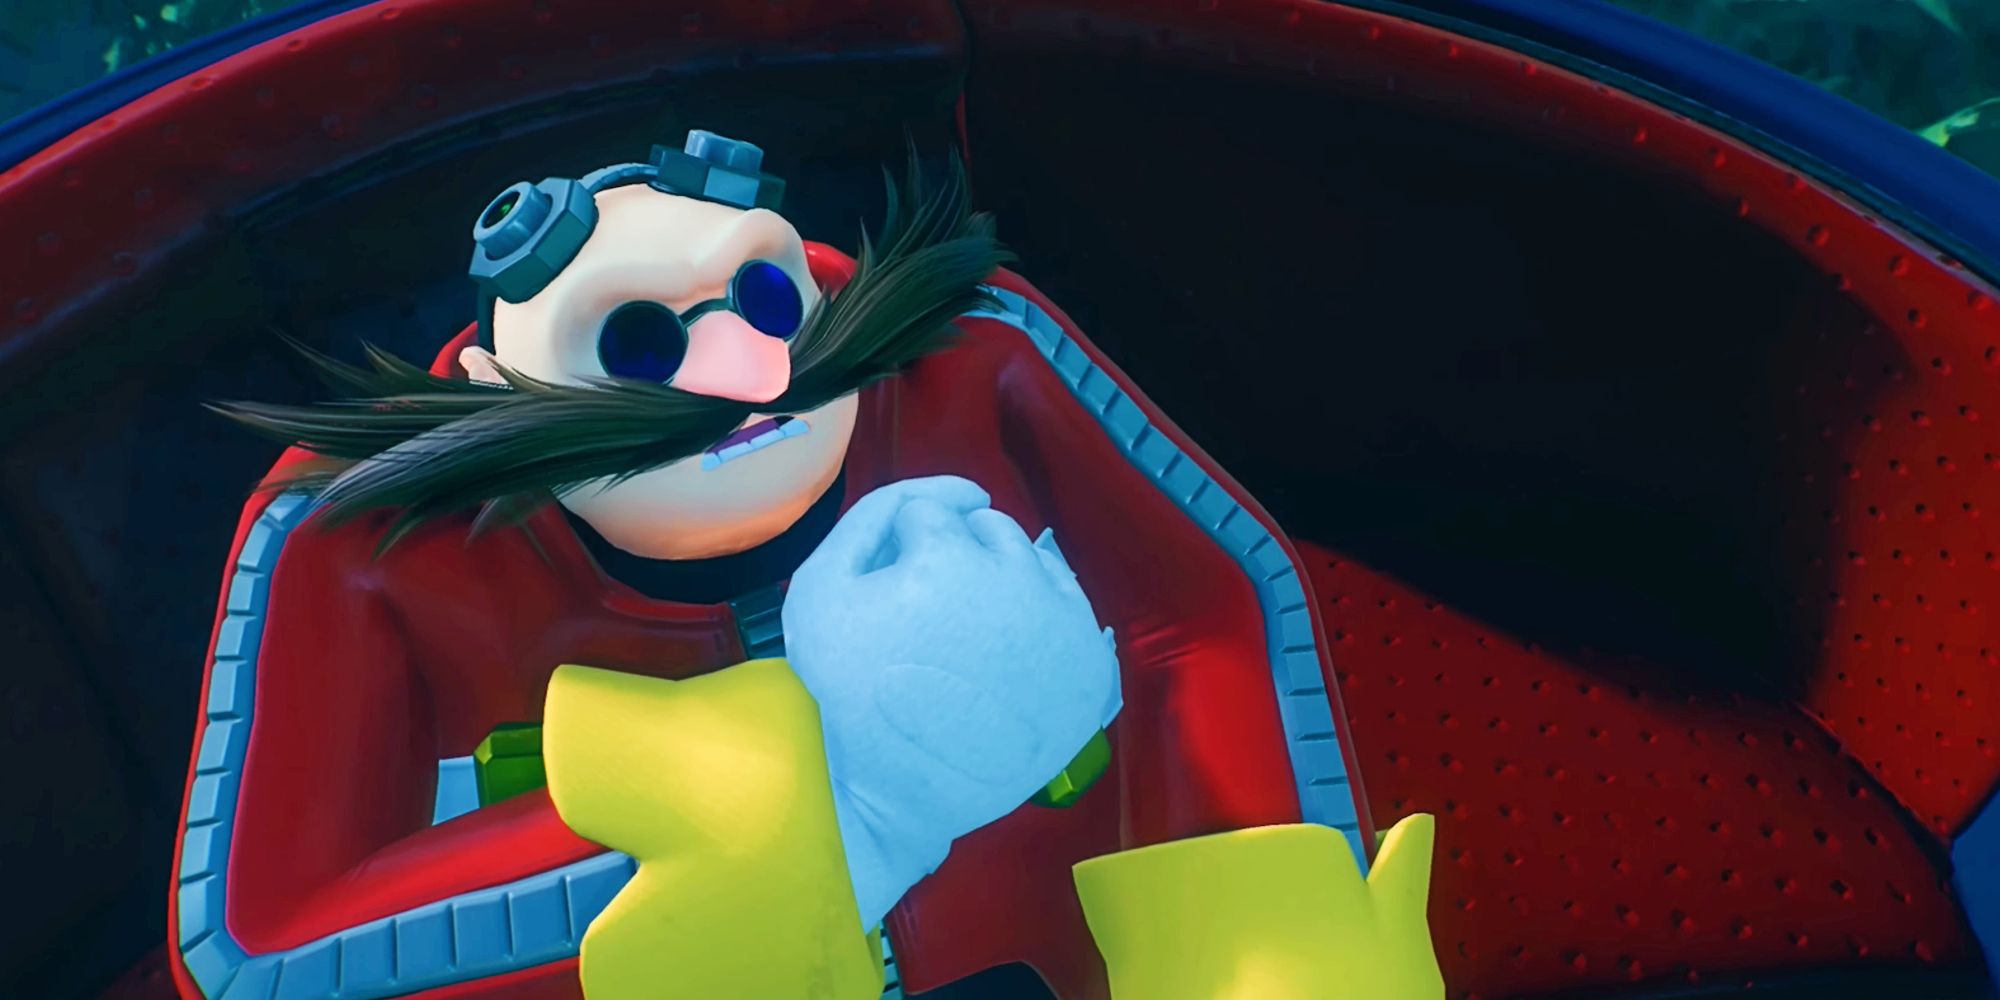 Dr. Eggman, fist over his heart, prays for his dearest daughter Sage to be successful in the coming battle.